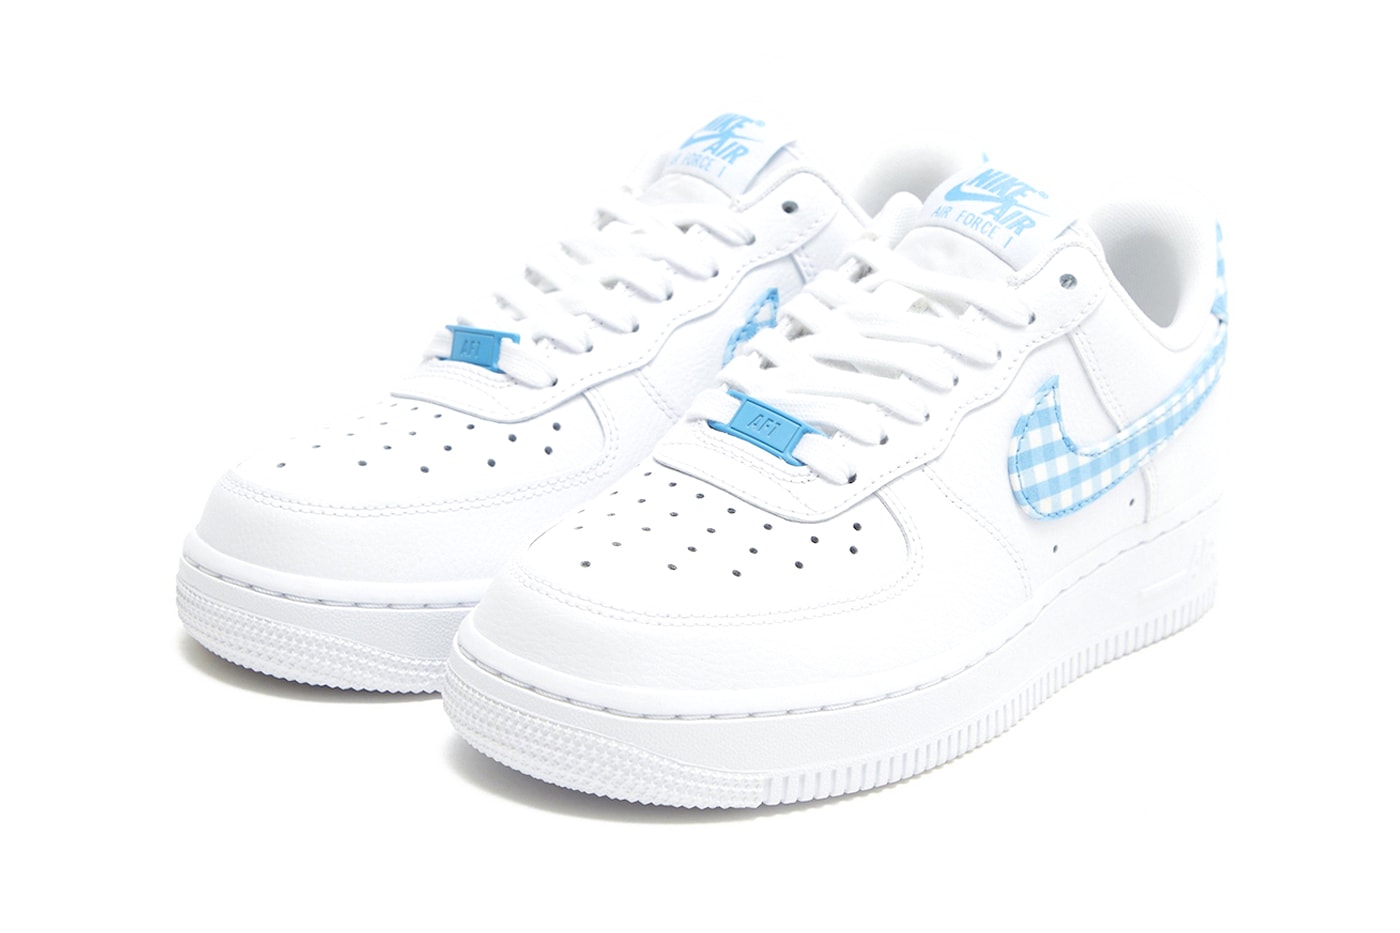 nike air force 1 low gingham red blue sneakers